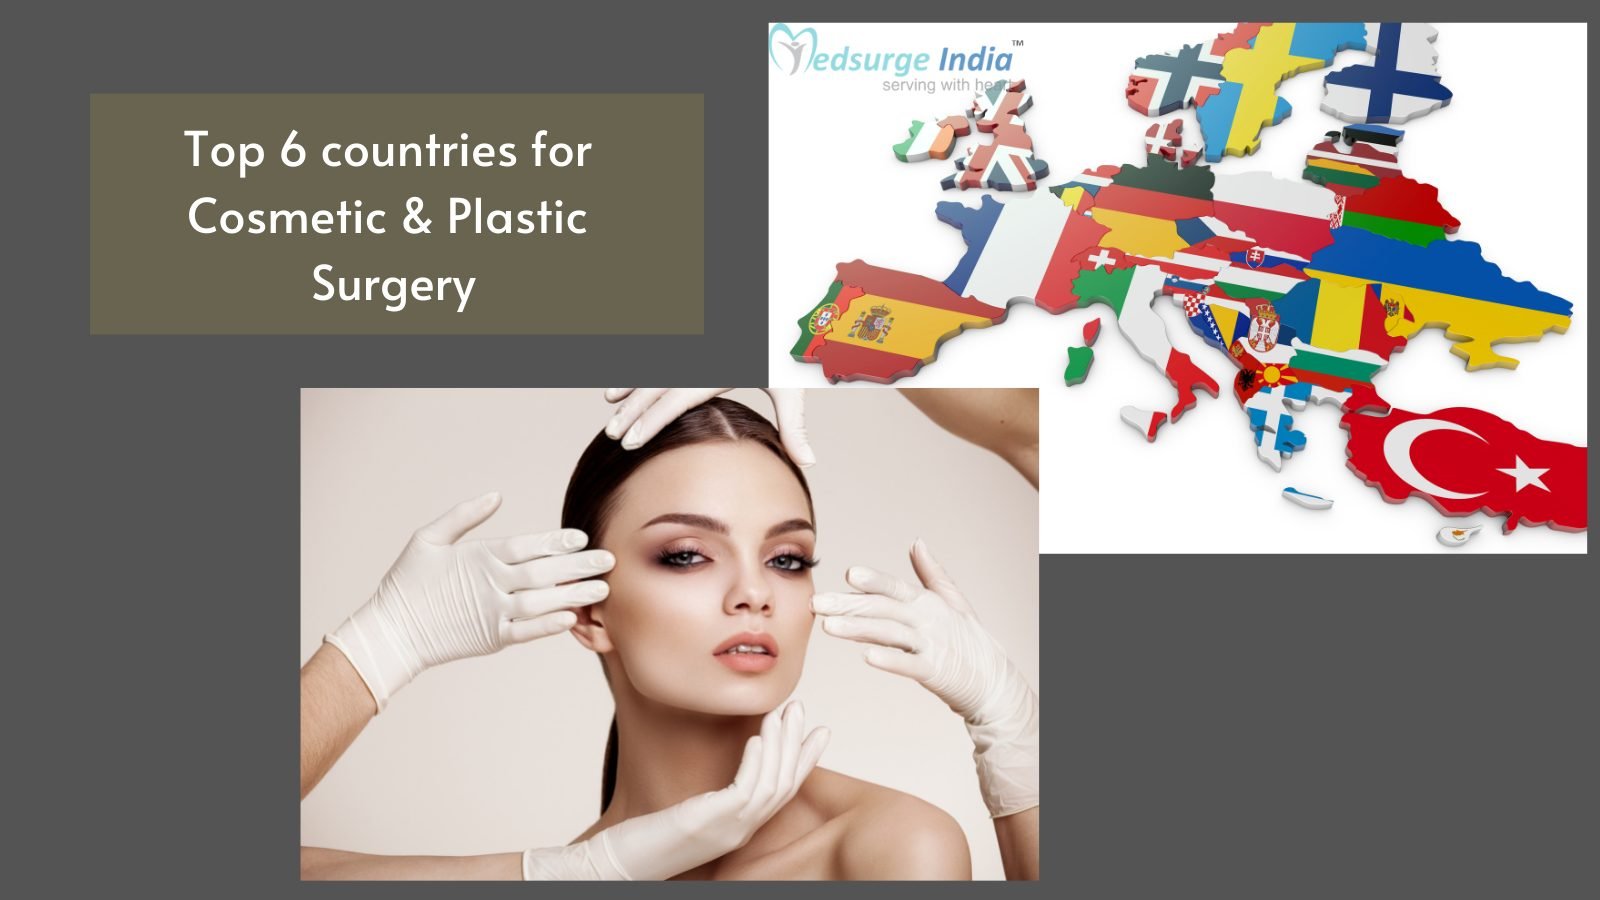 Top 6 Countries For Cosmetic & Plastic Surgery